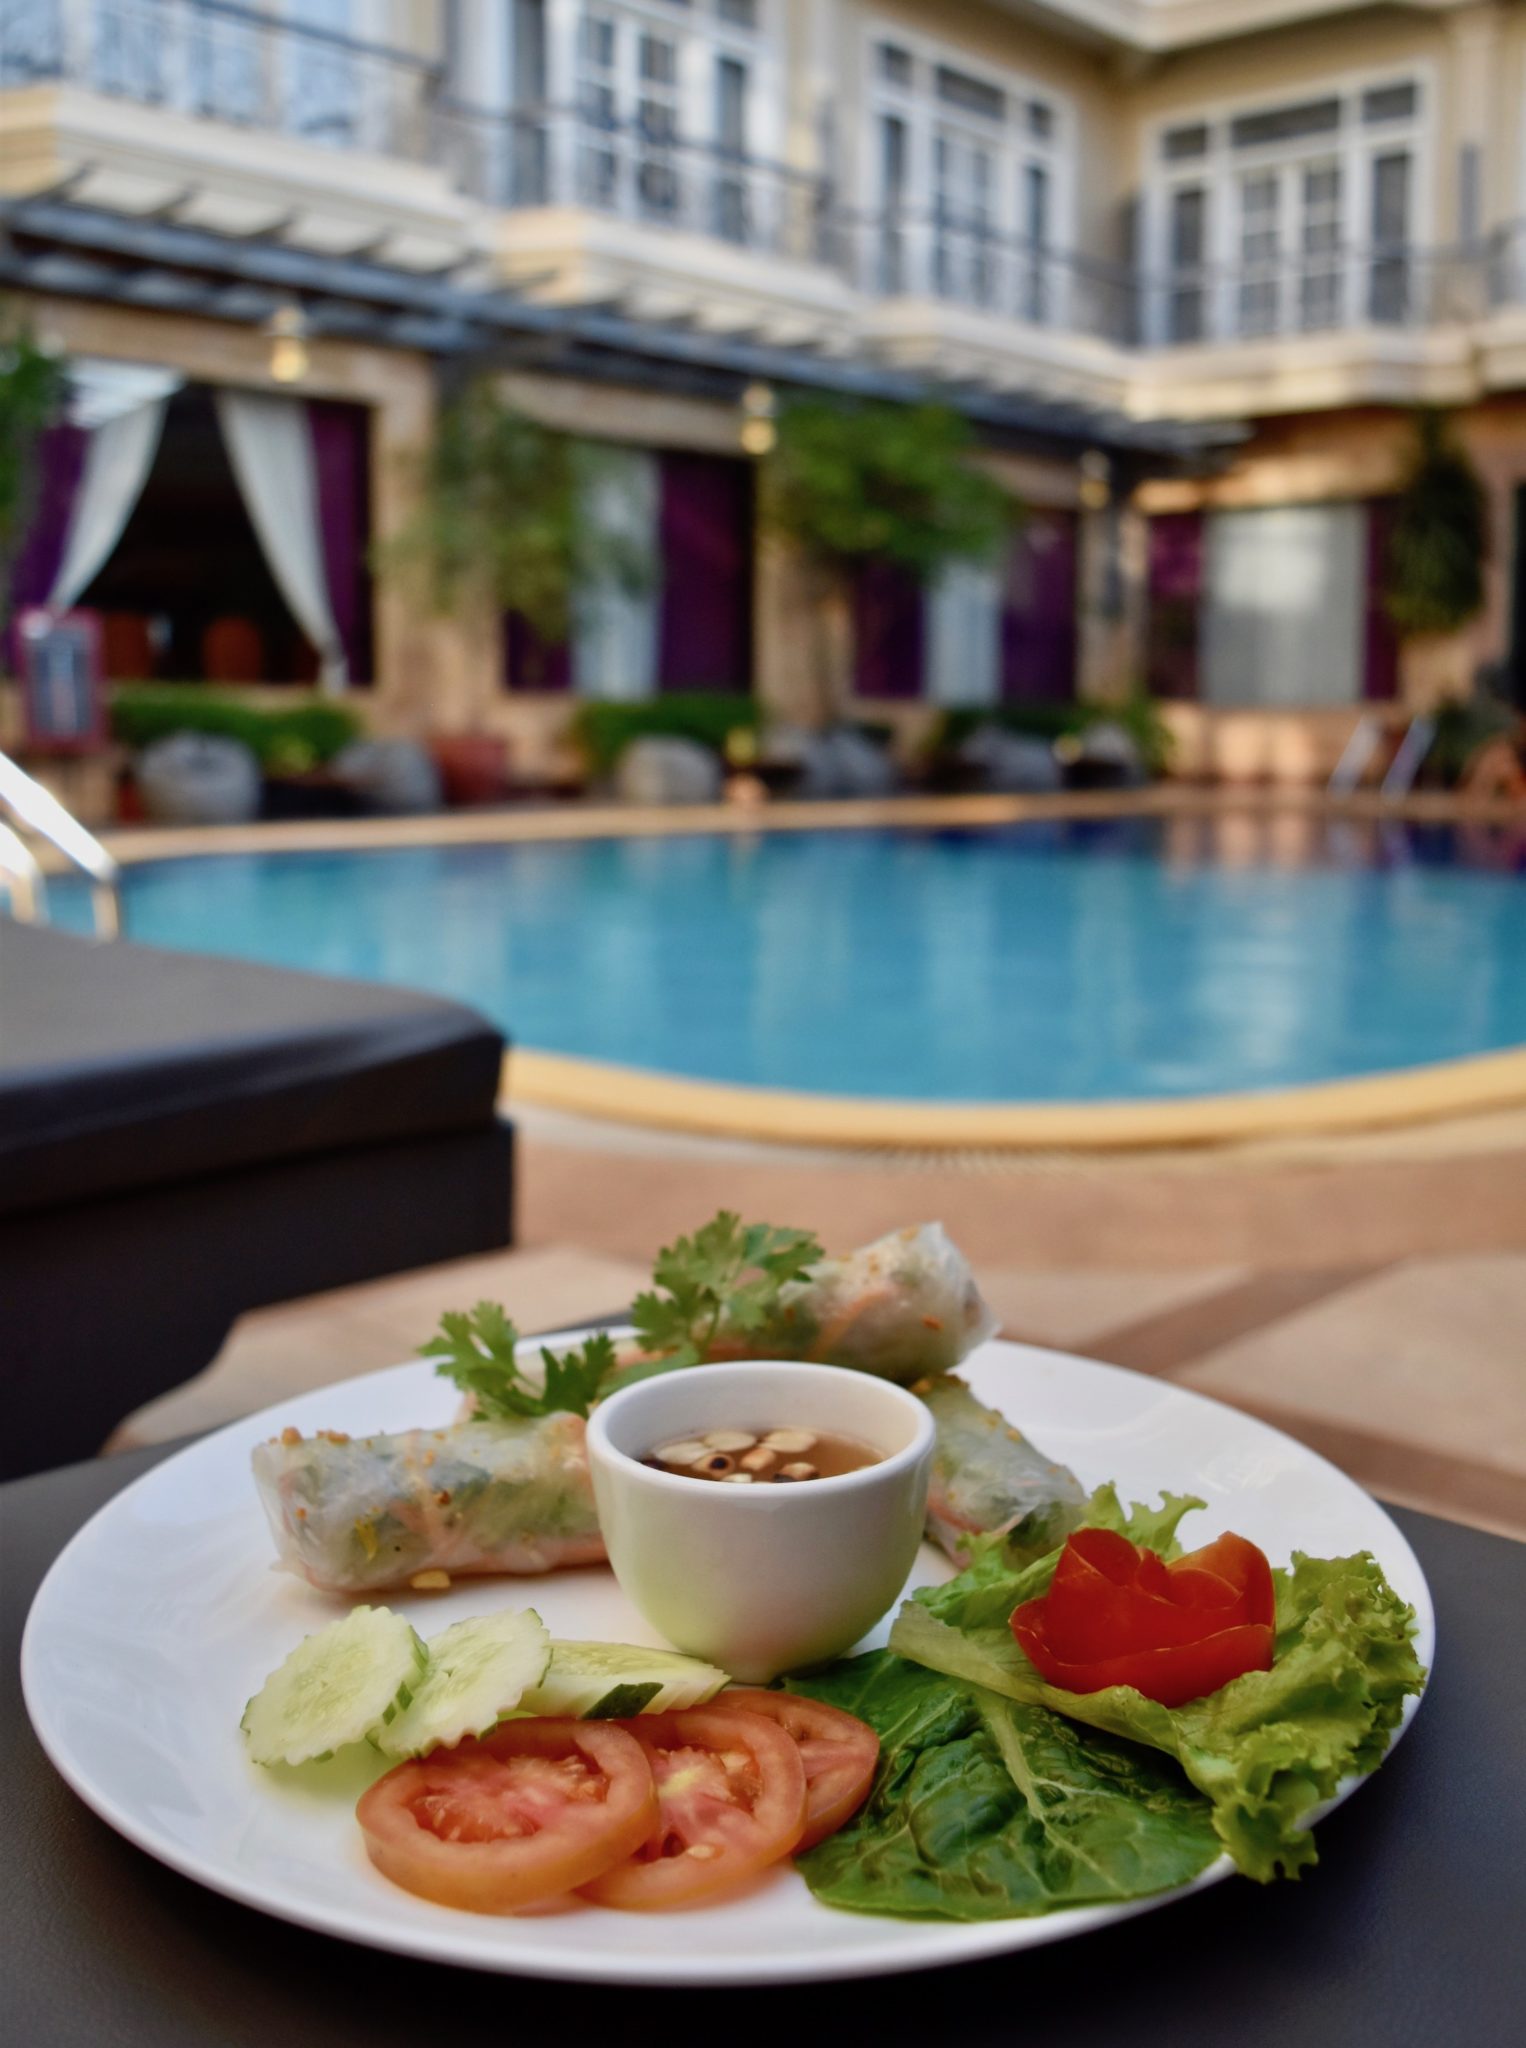 Summer rolls and salad by the pool 